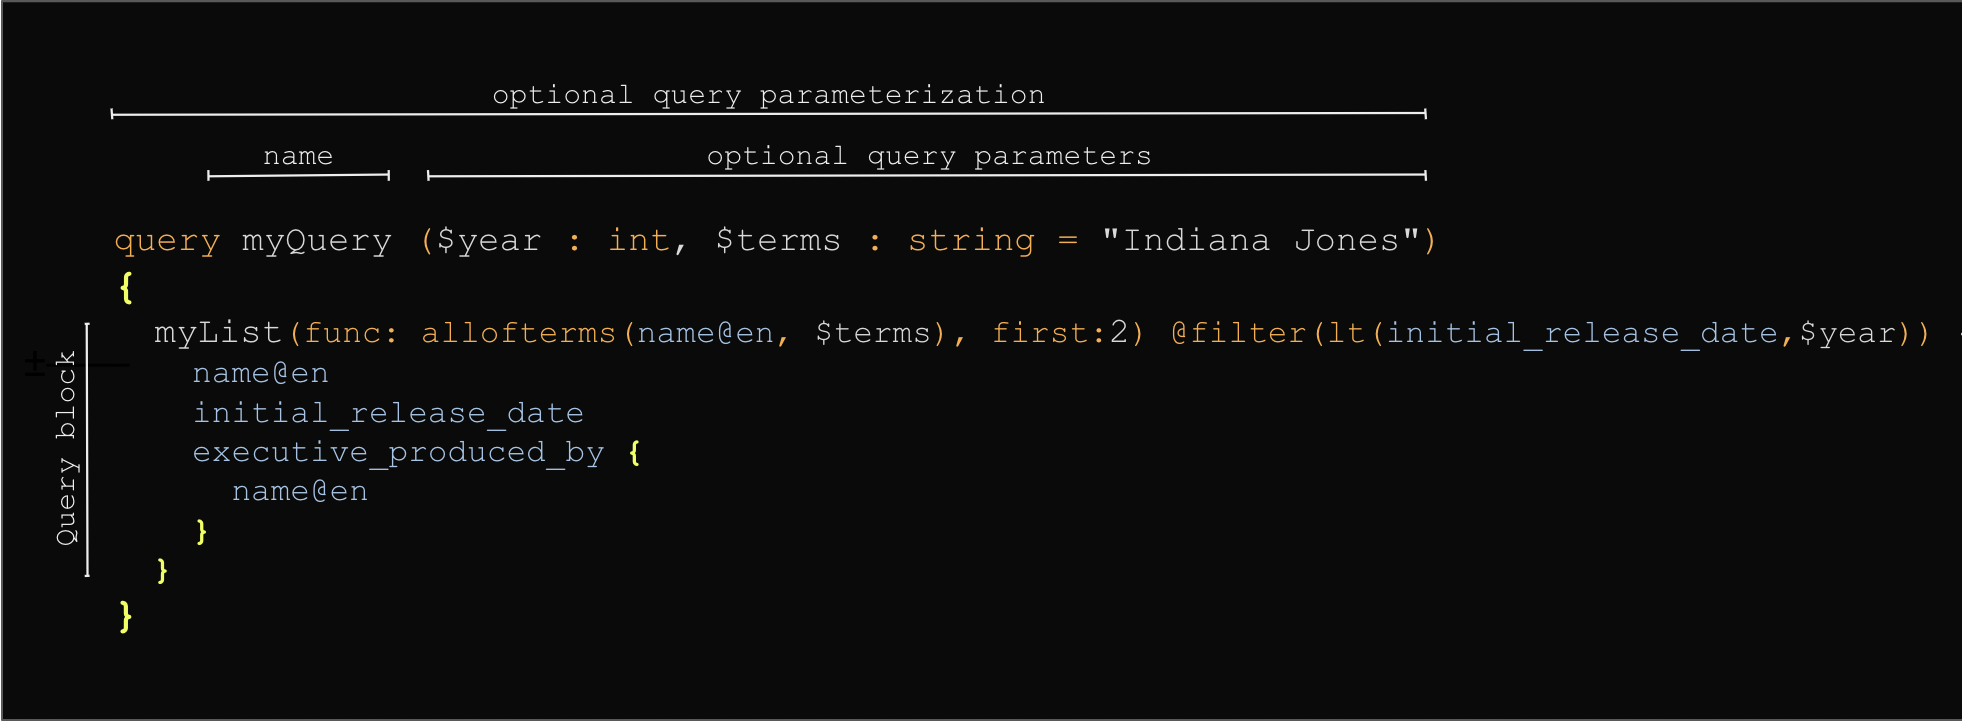 DQL Query with parameterization